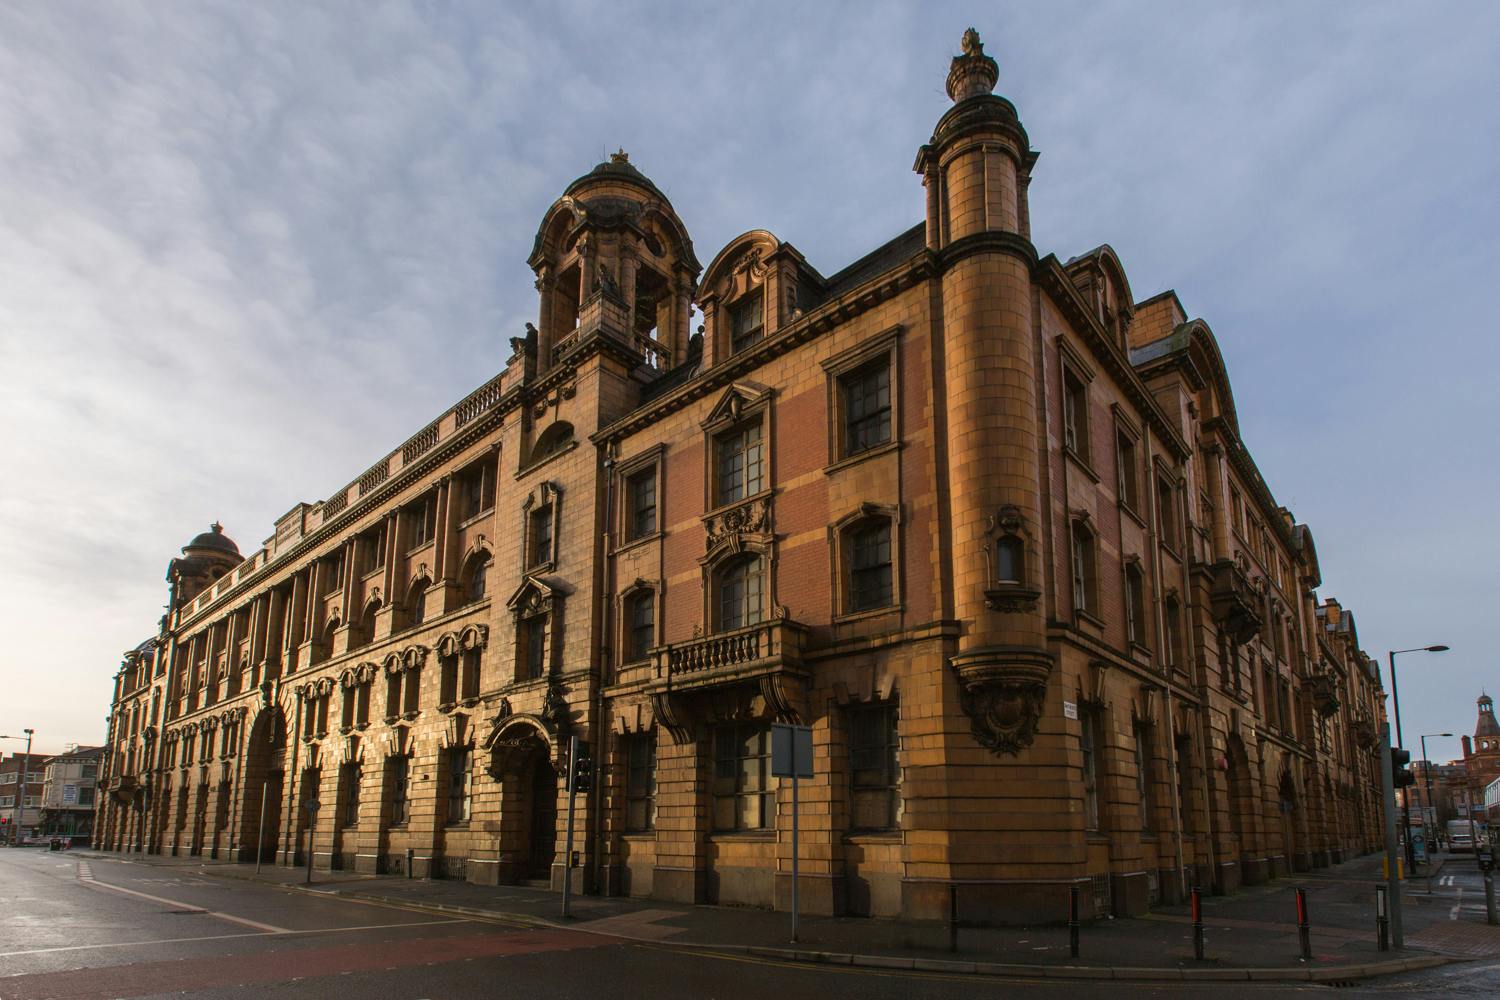 London Road Fire Station, Manchester